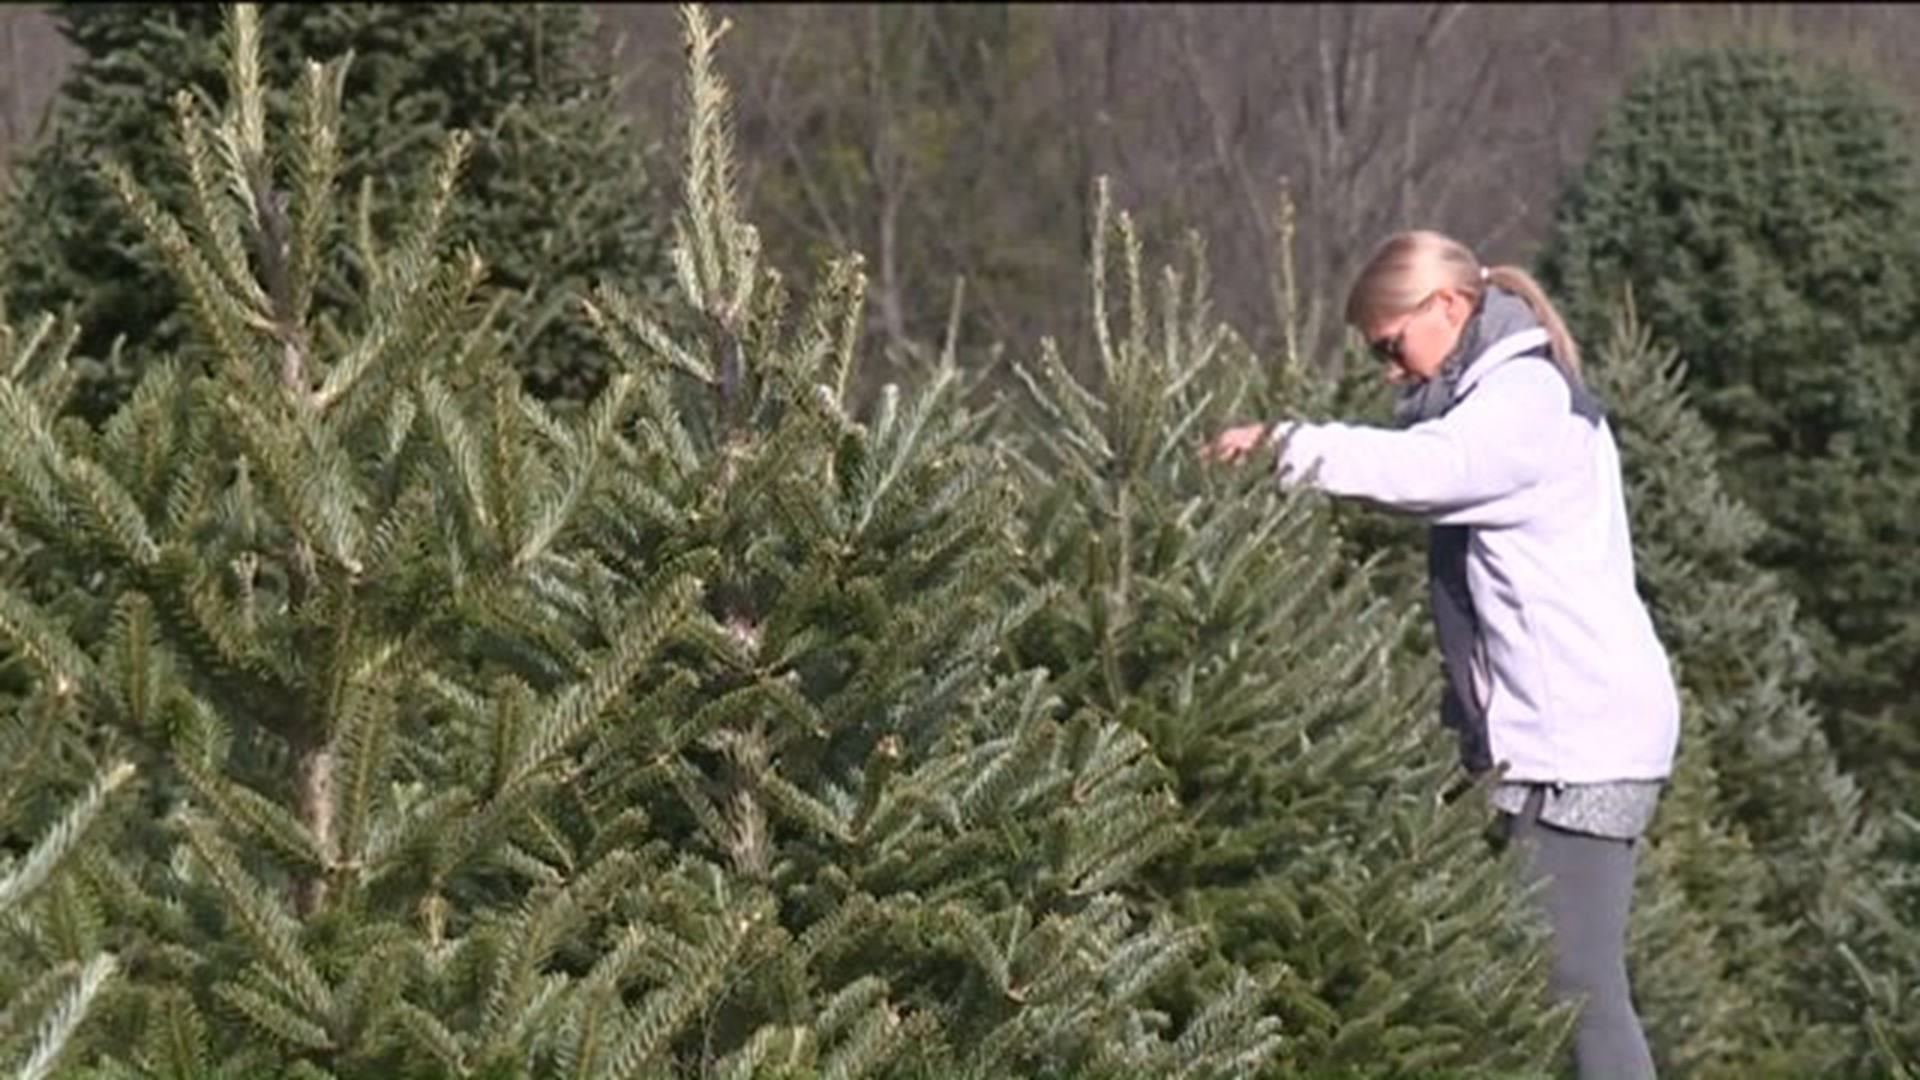 Trees for Troops Helps Military Families Get Christmas Trees